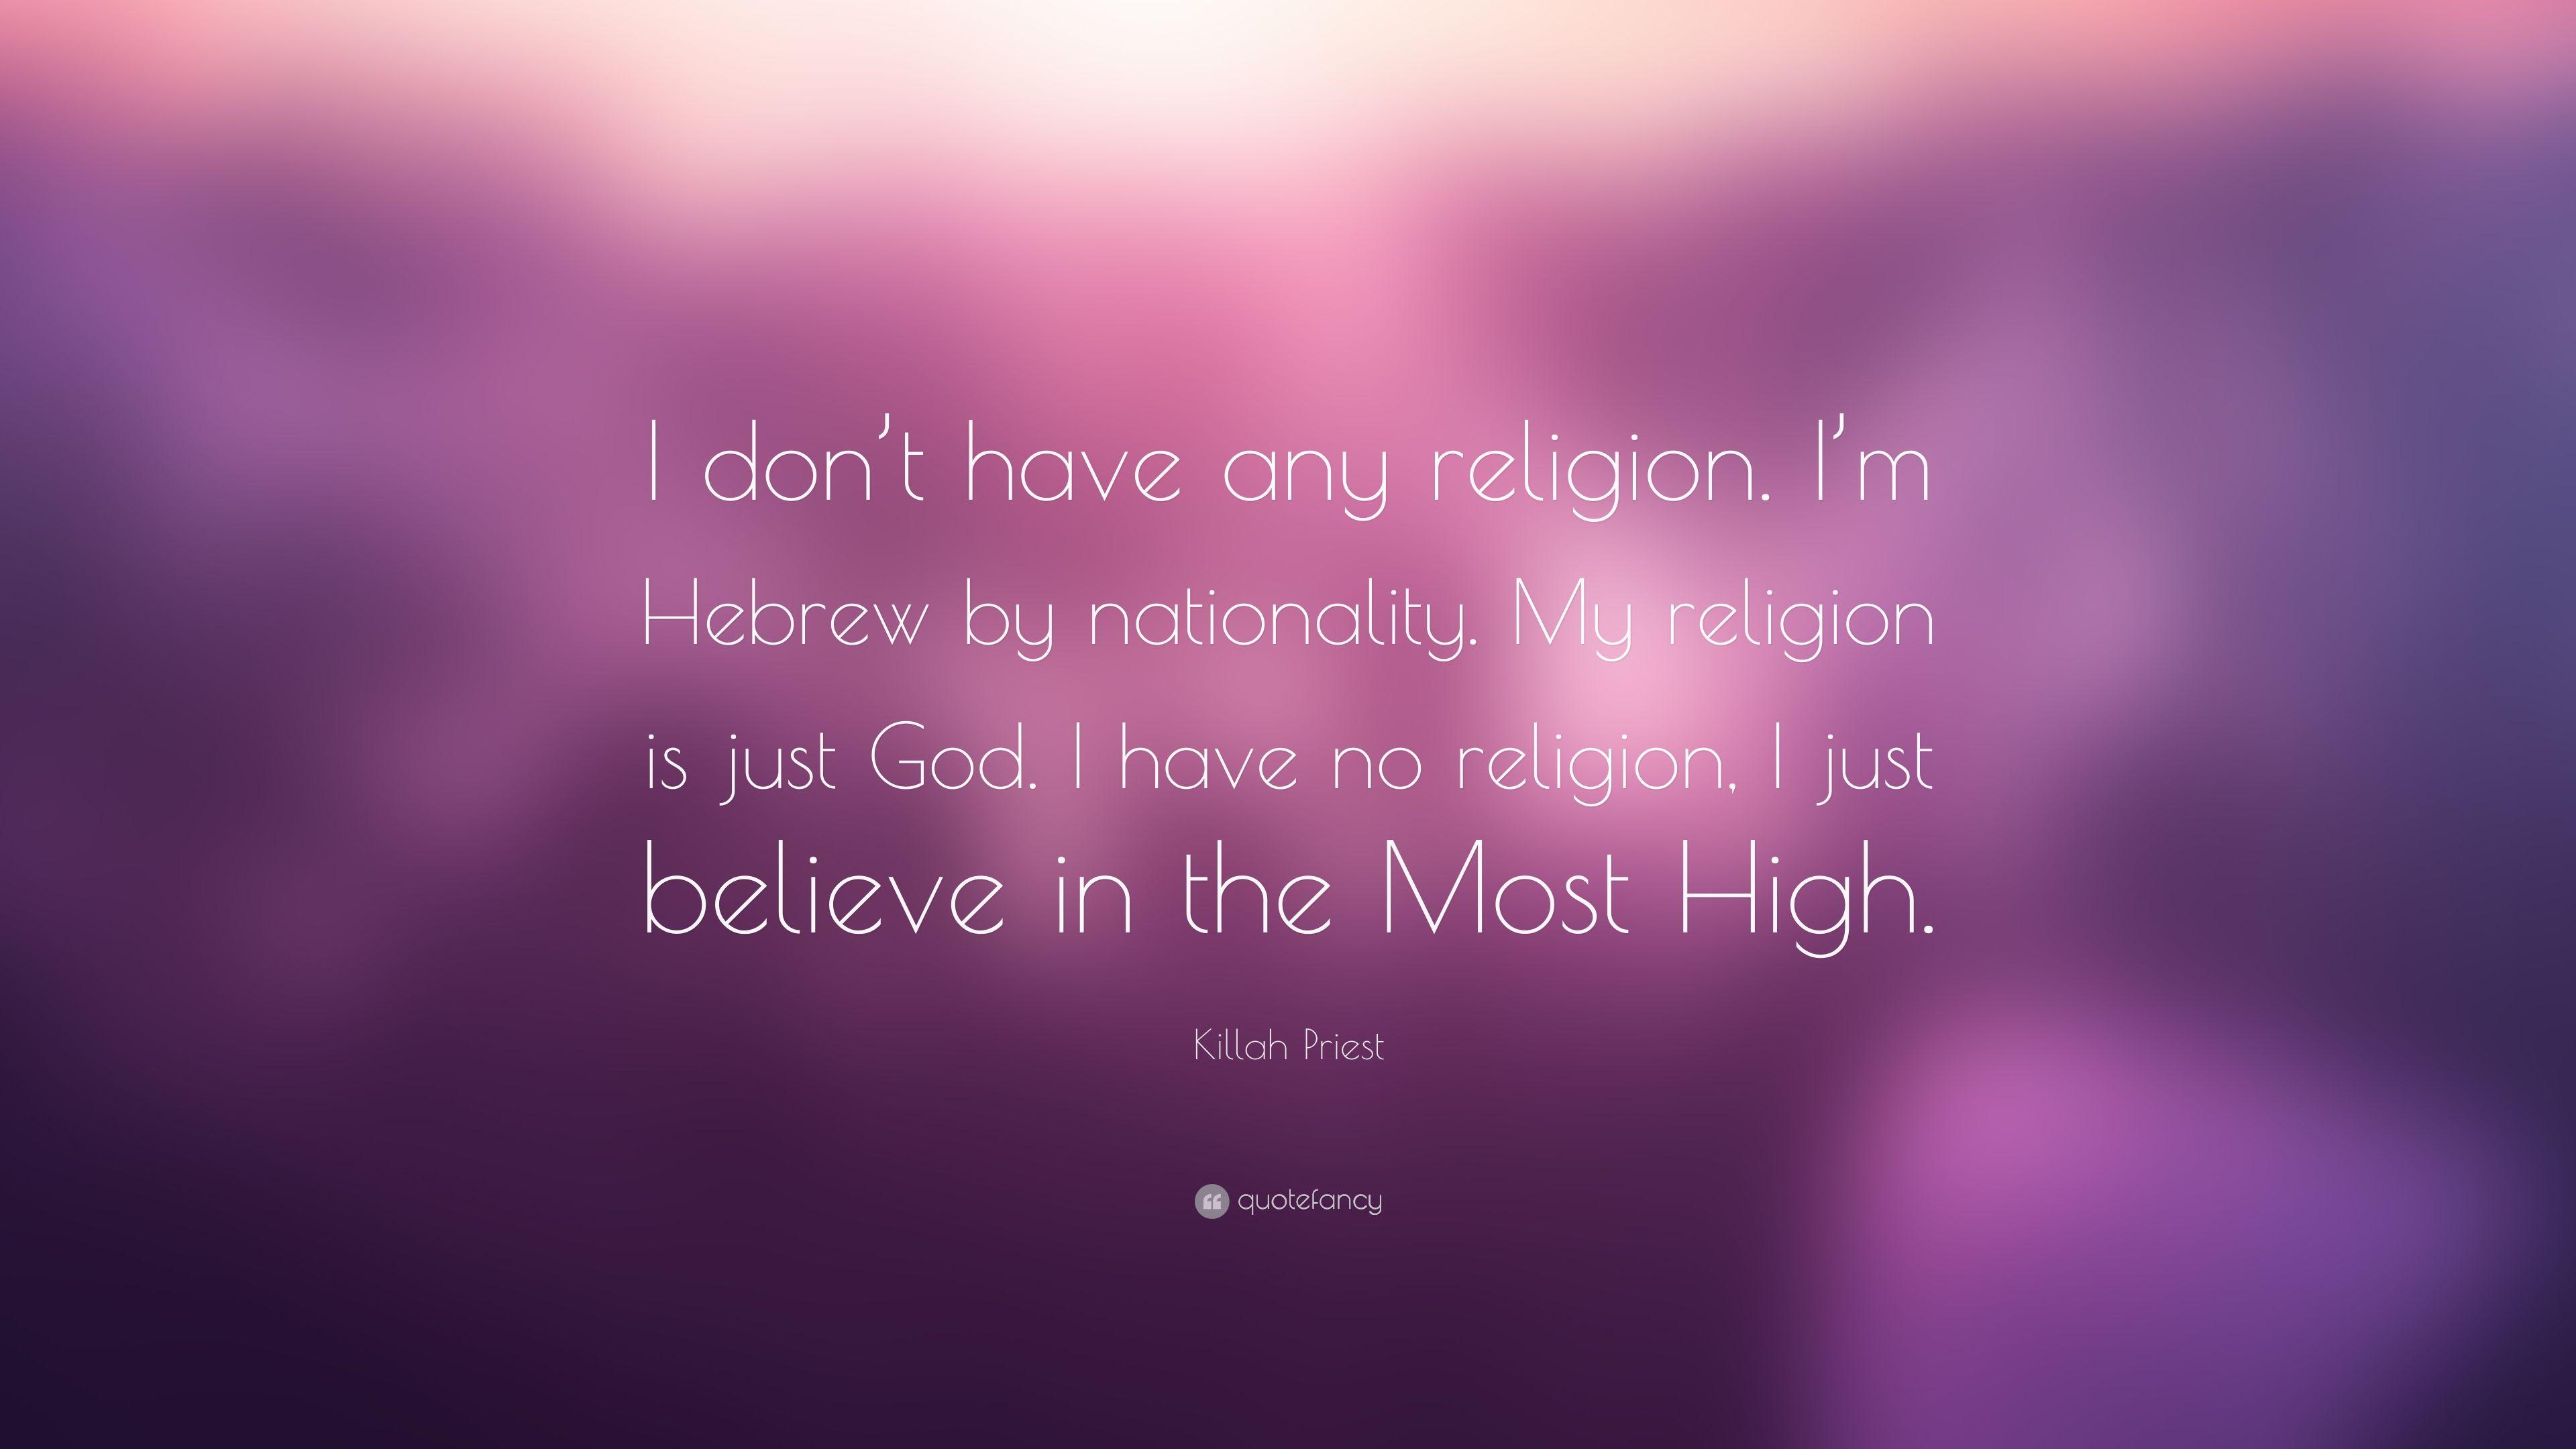 Killah Priest Quote: “I don't have any religion. I'm Hebrew